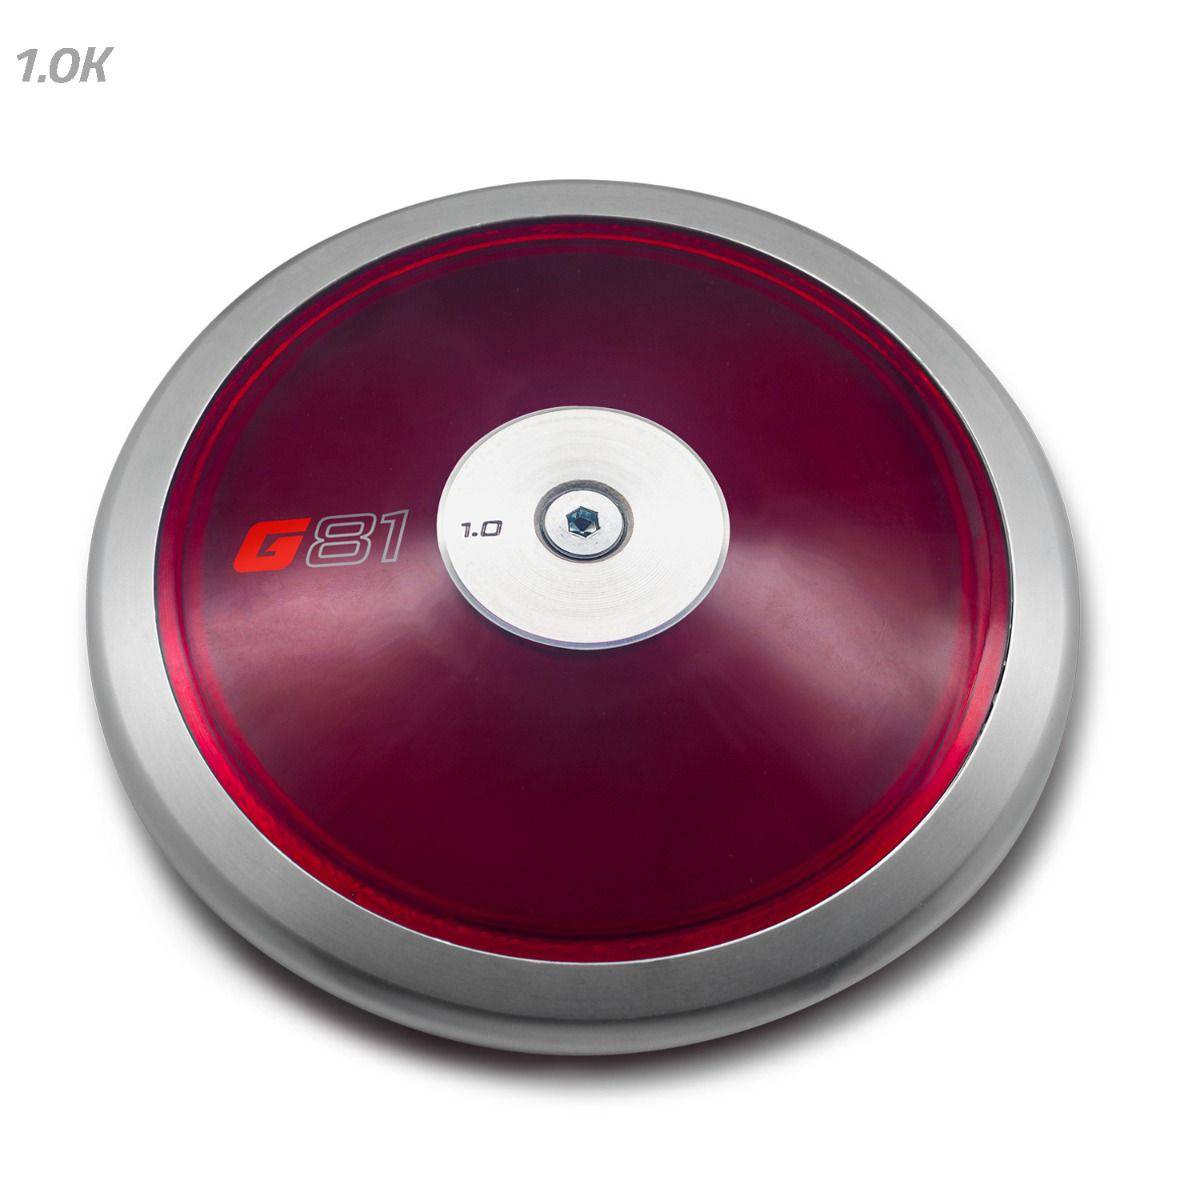 Gill Athletics 1.0K S81 Red Discus